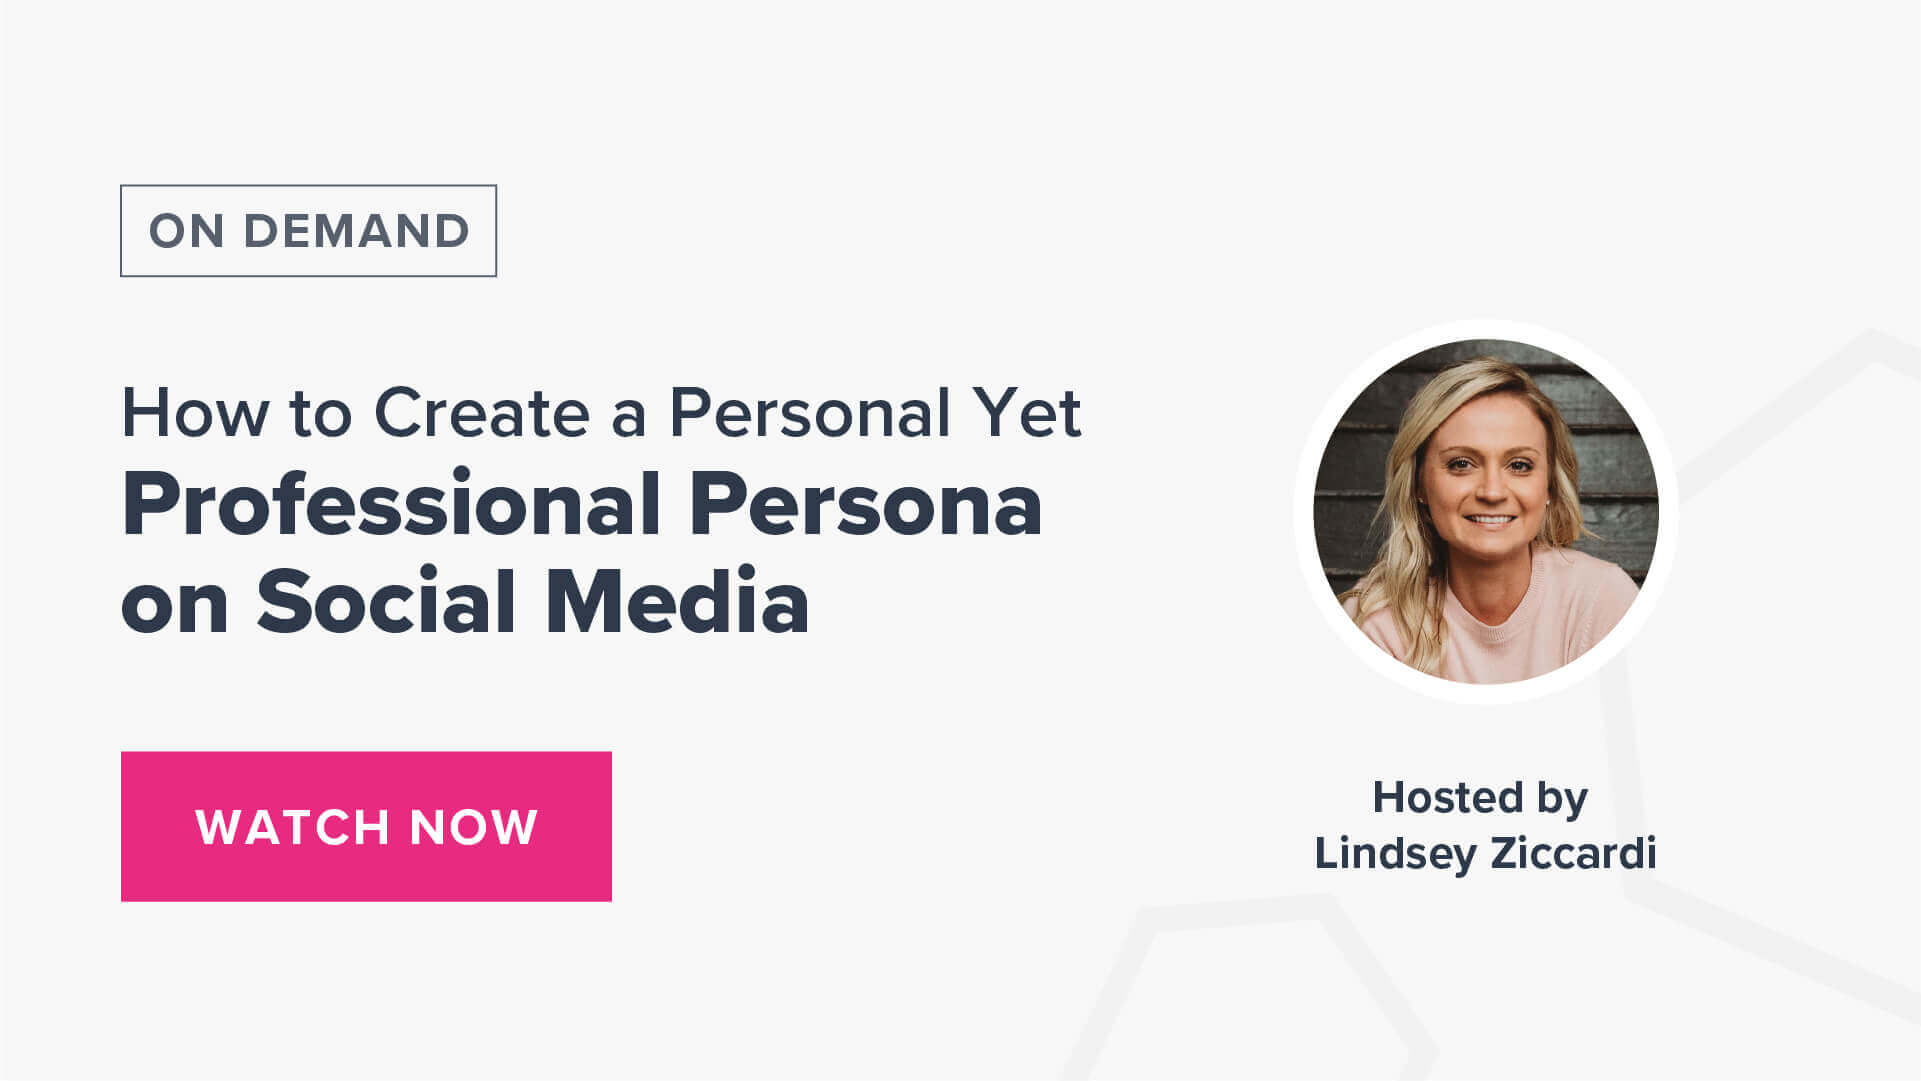 How to Create a Personal Yet Professional Persona on Social Media